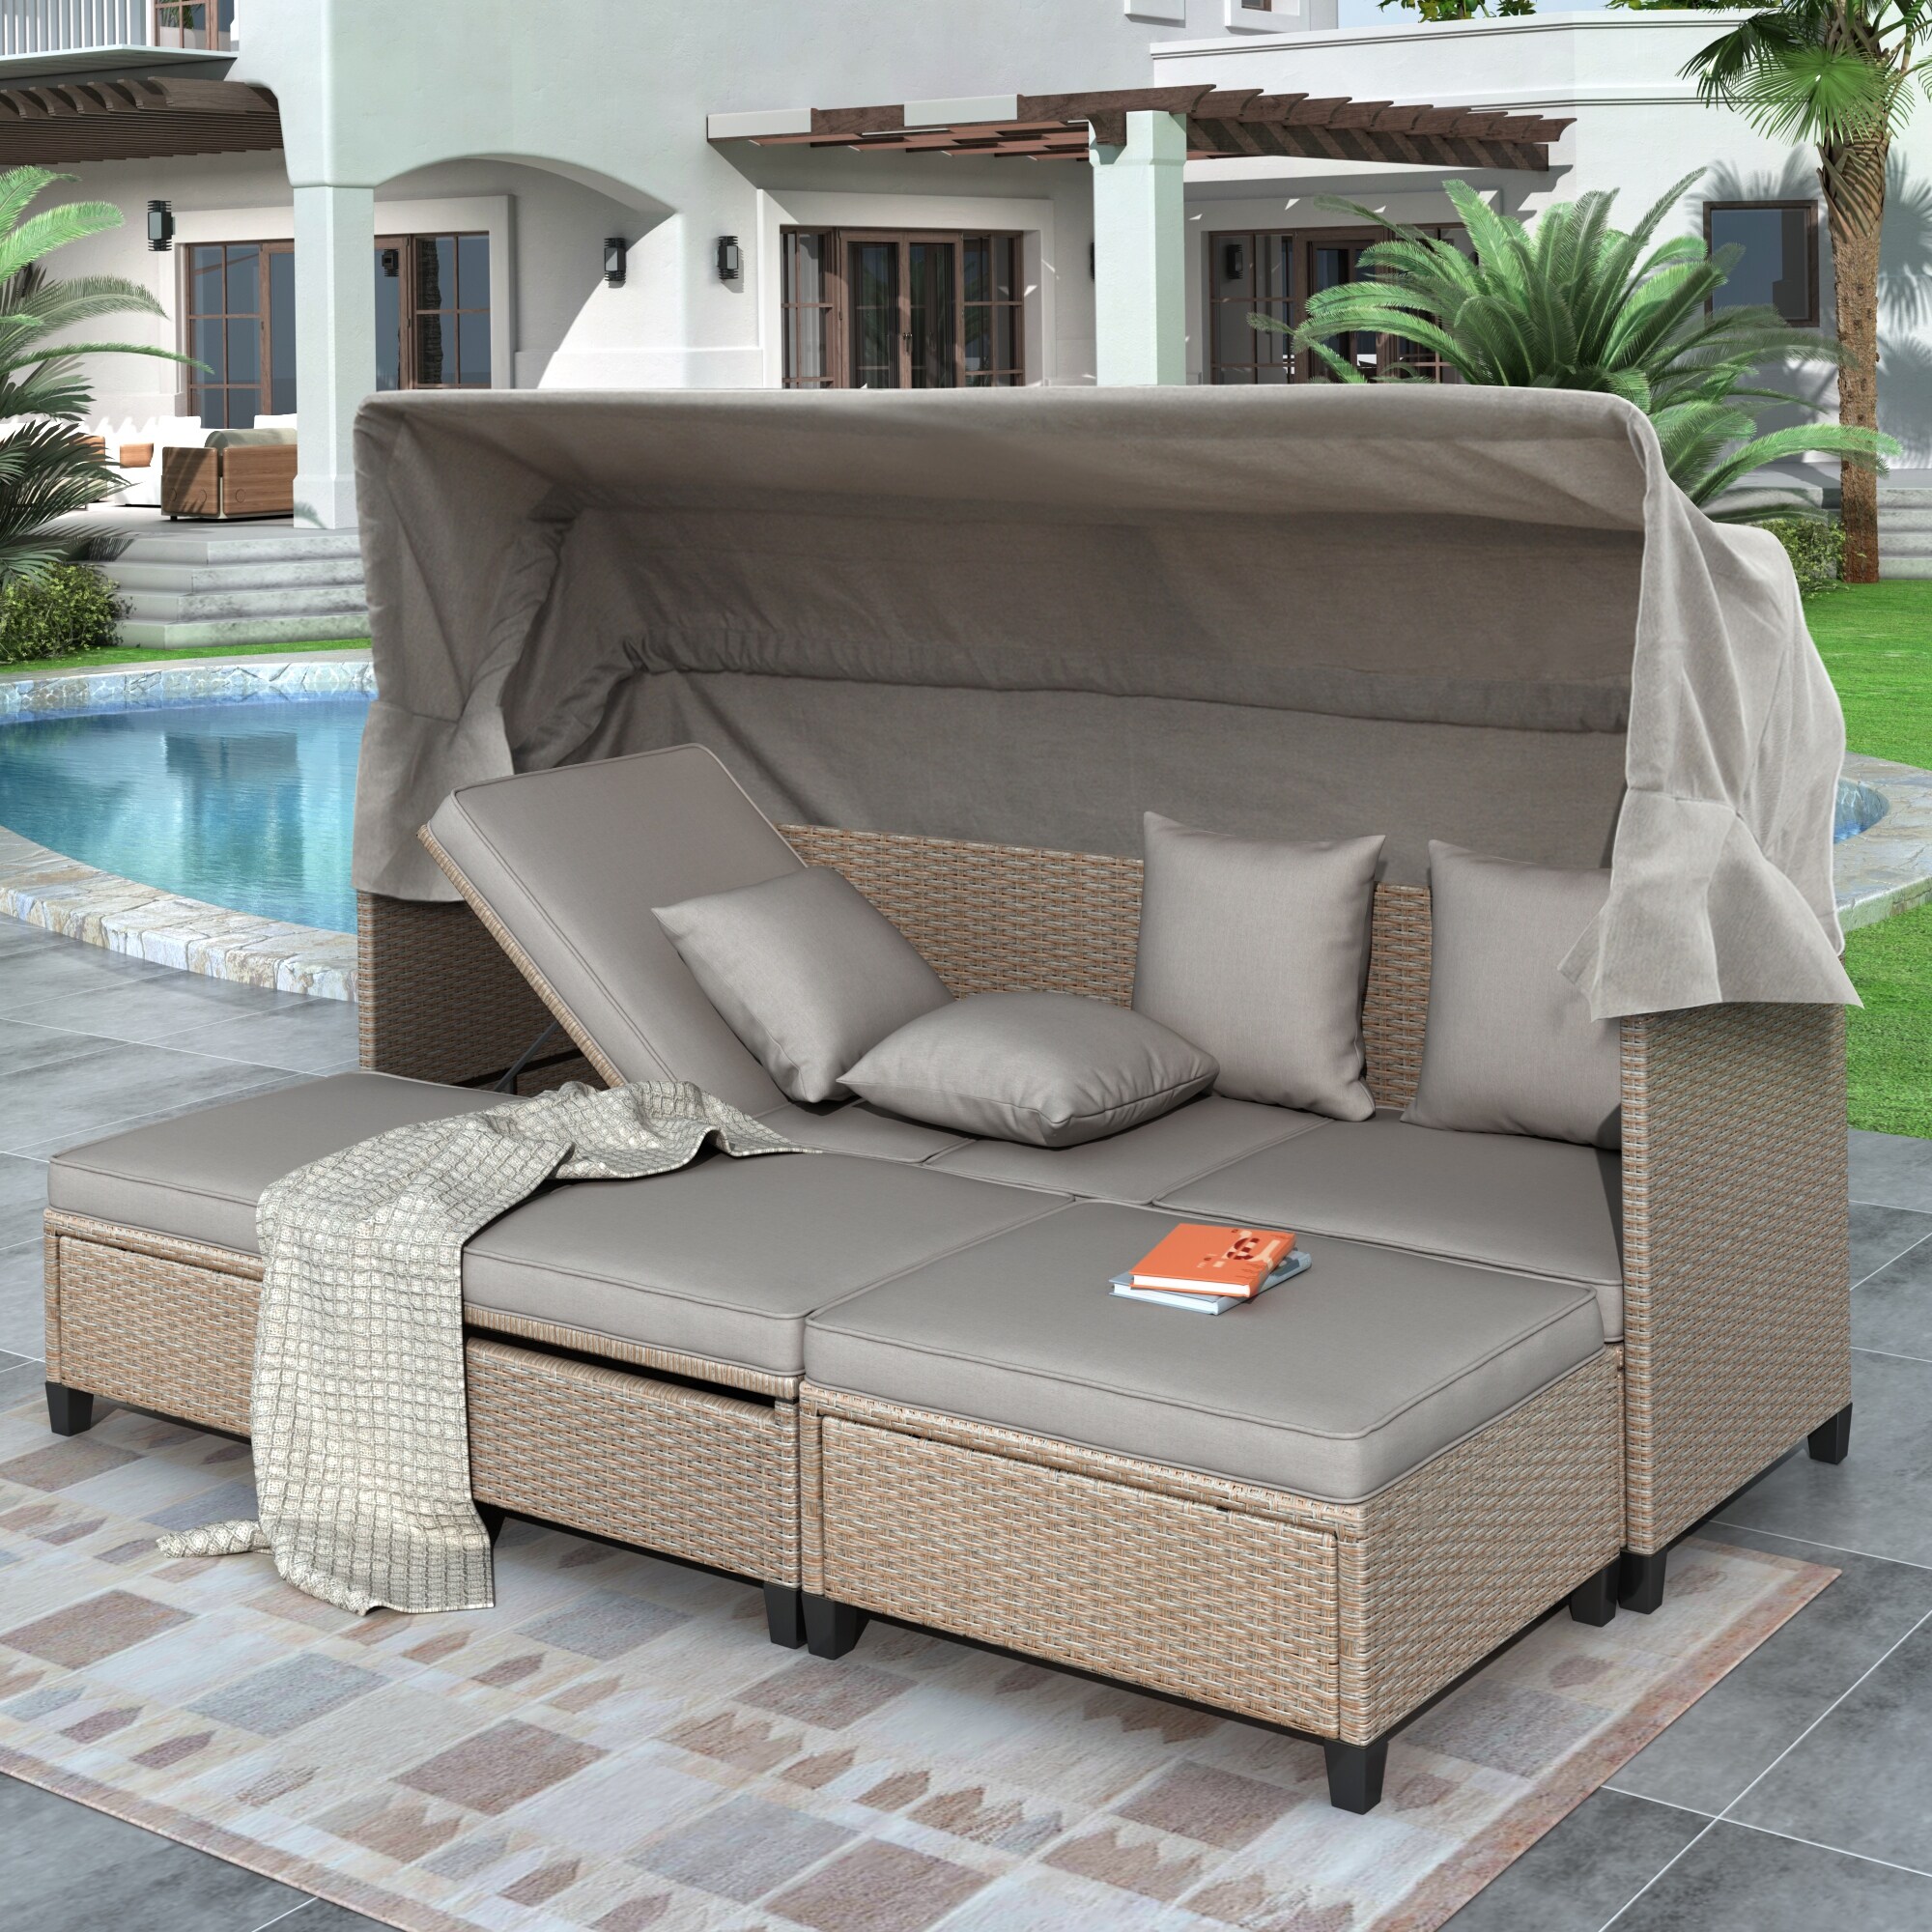 Uv-proof Resin Wicker Patio Sofa Set With Retractable Canopy  Cushions